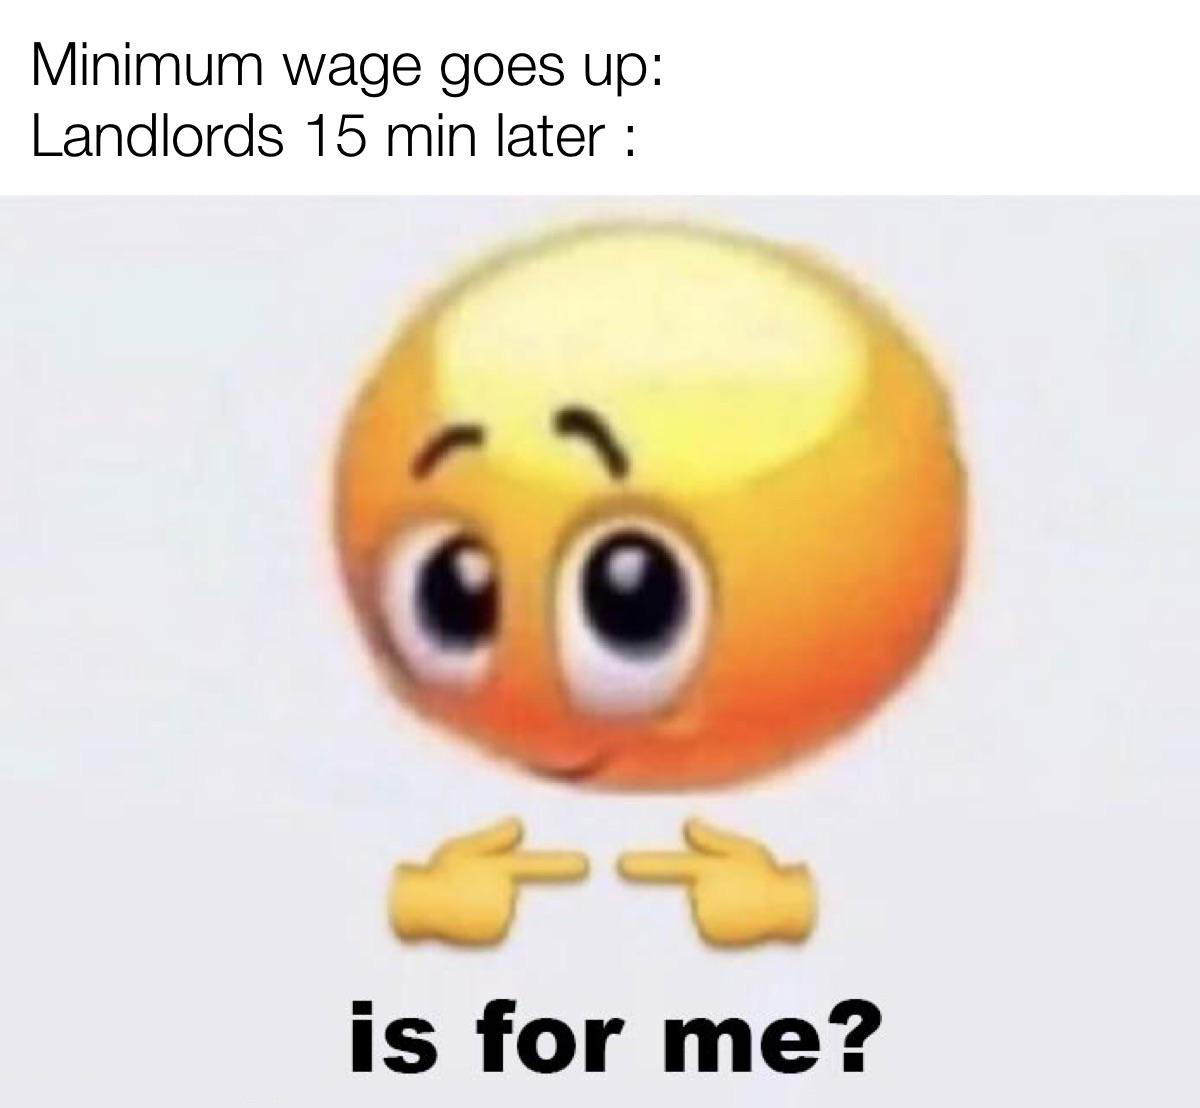 funny and dank memes  - spirit halloween memes - Minimum wage goes up Landlords 15 min later is for me?